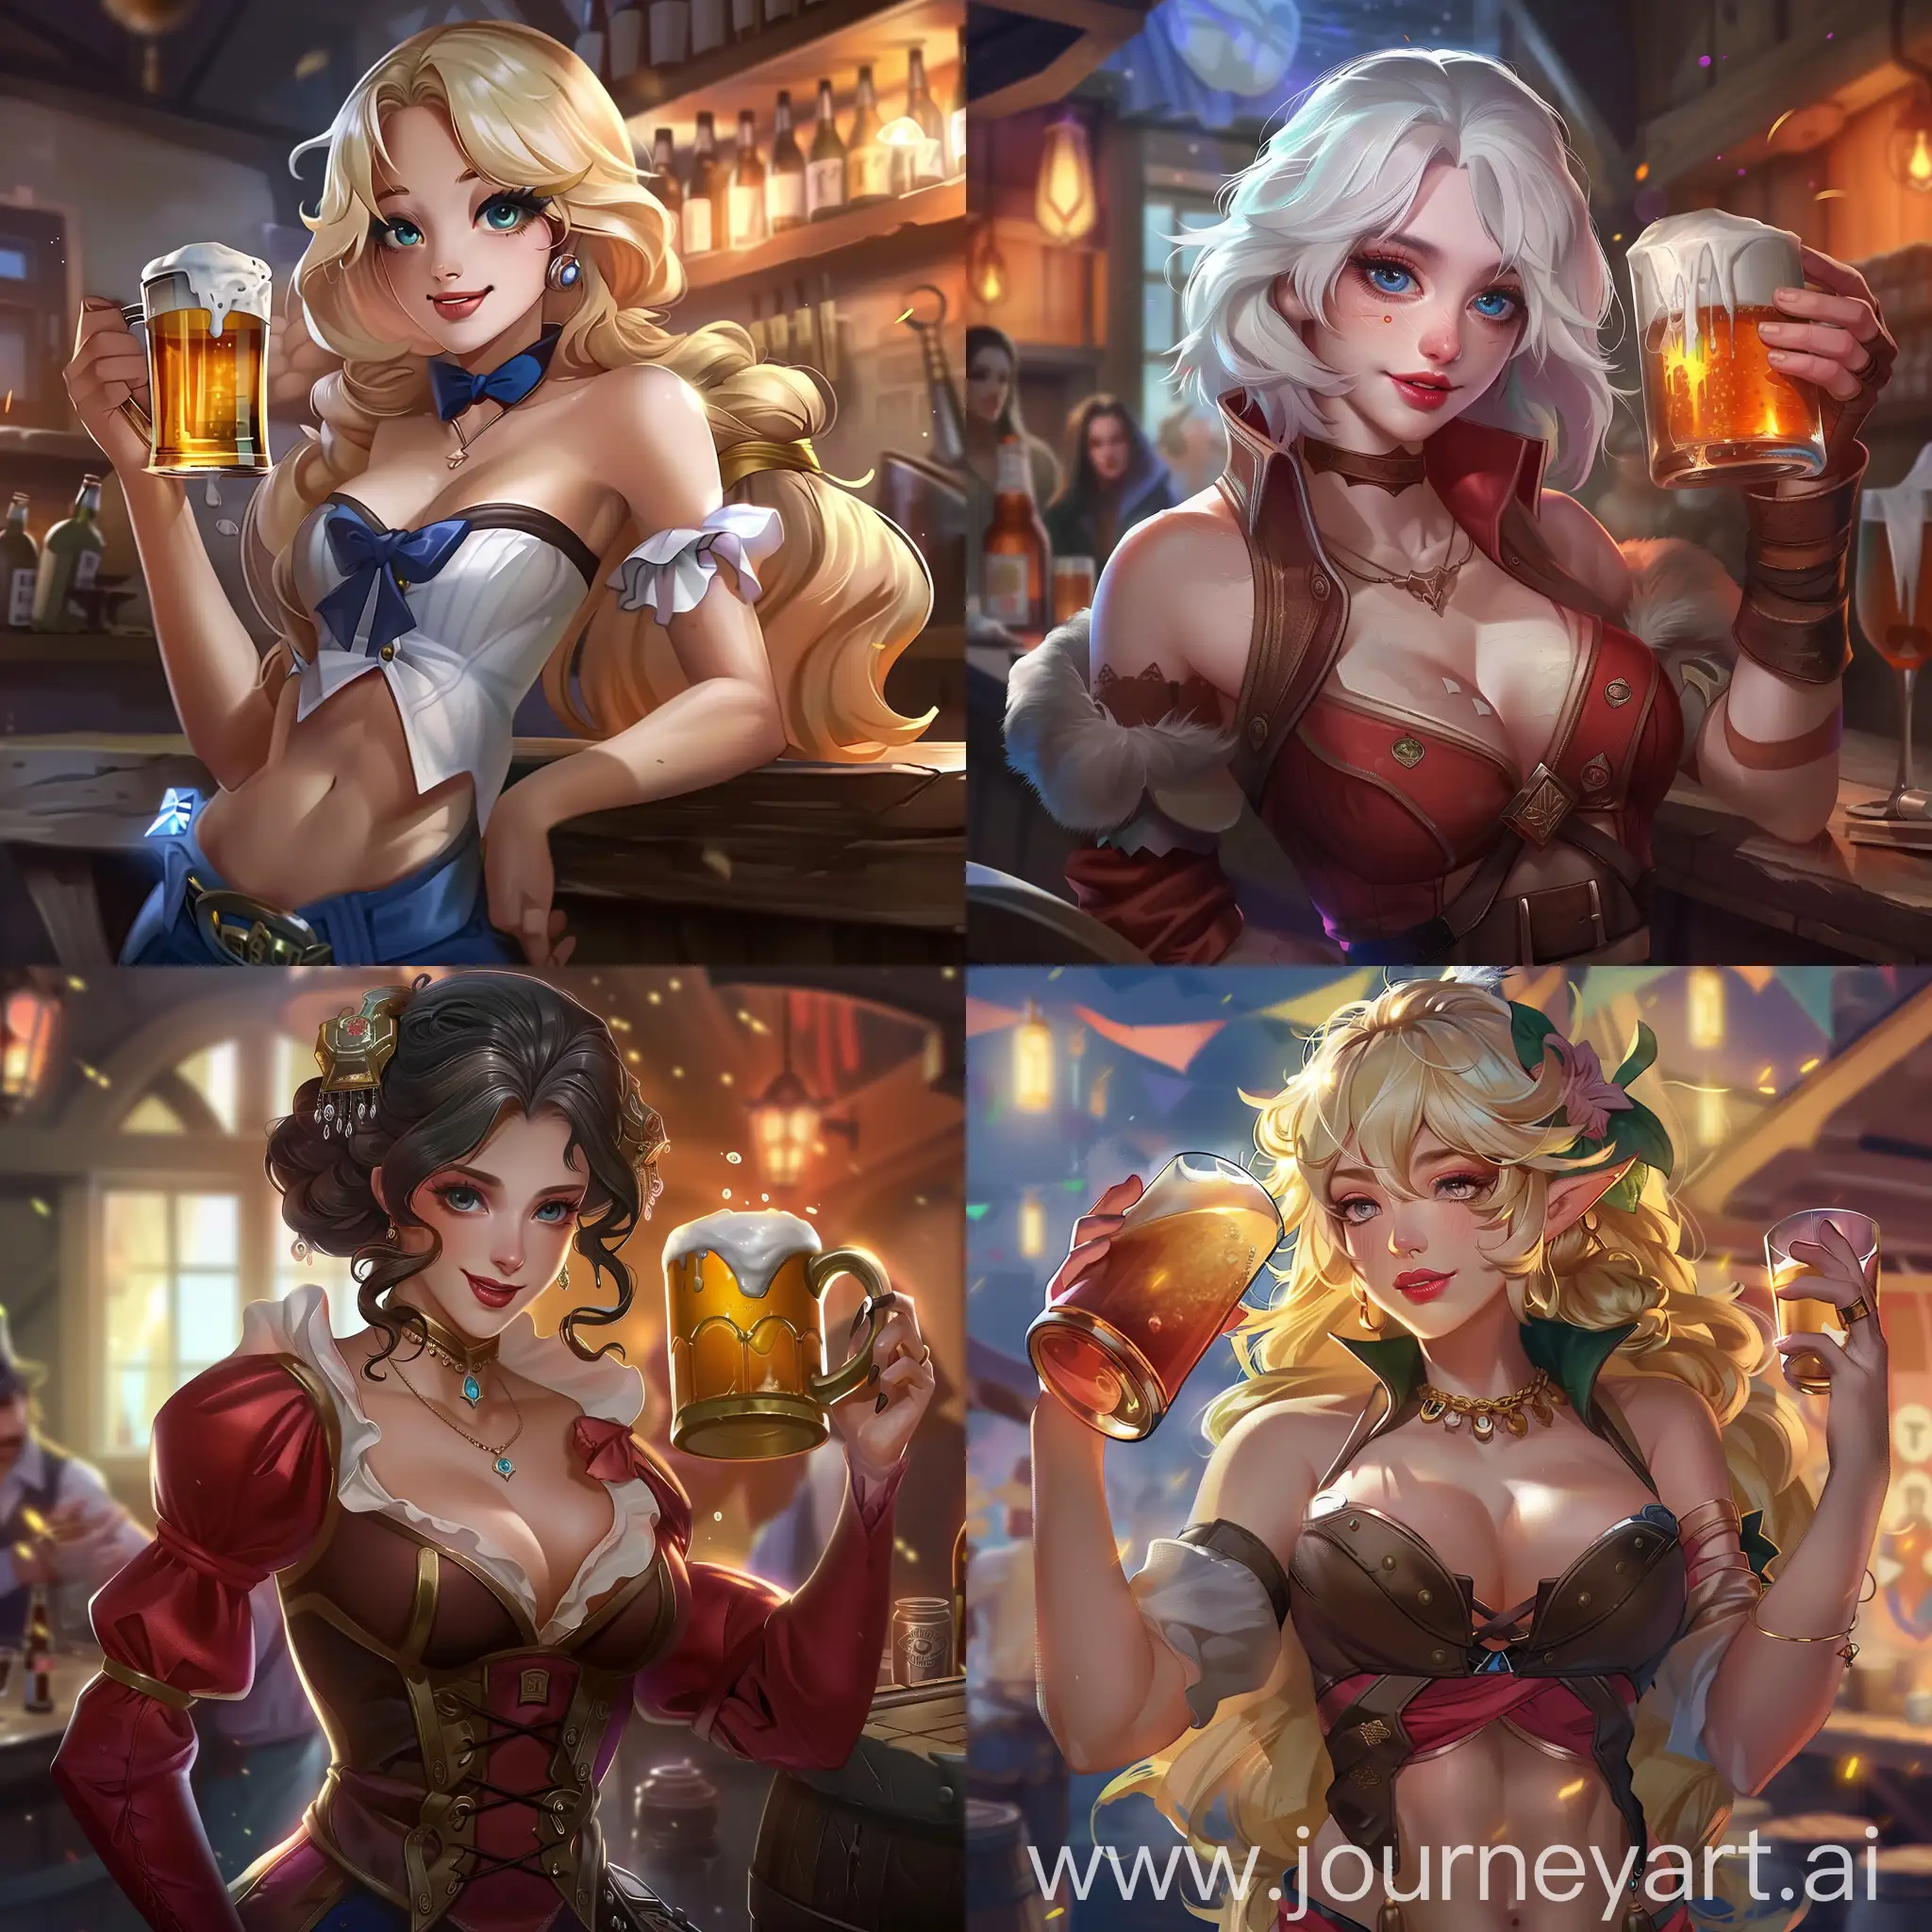 Character-Fanny-from-Mobile-Legends-Holding-a-Mug-of-Beer